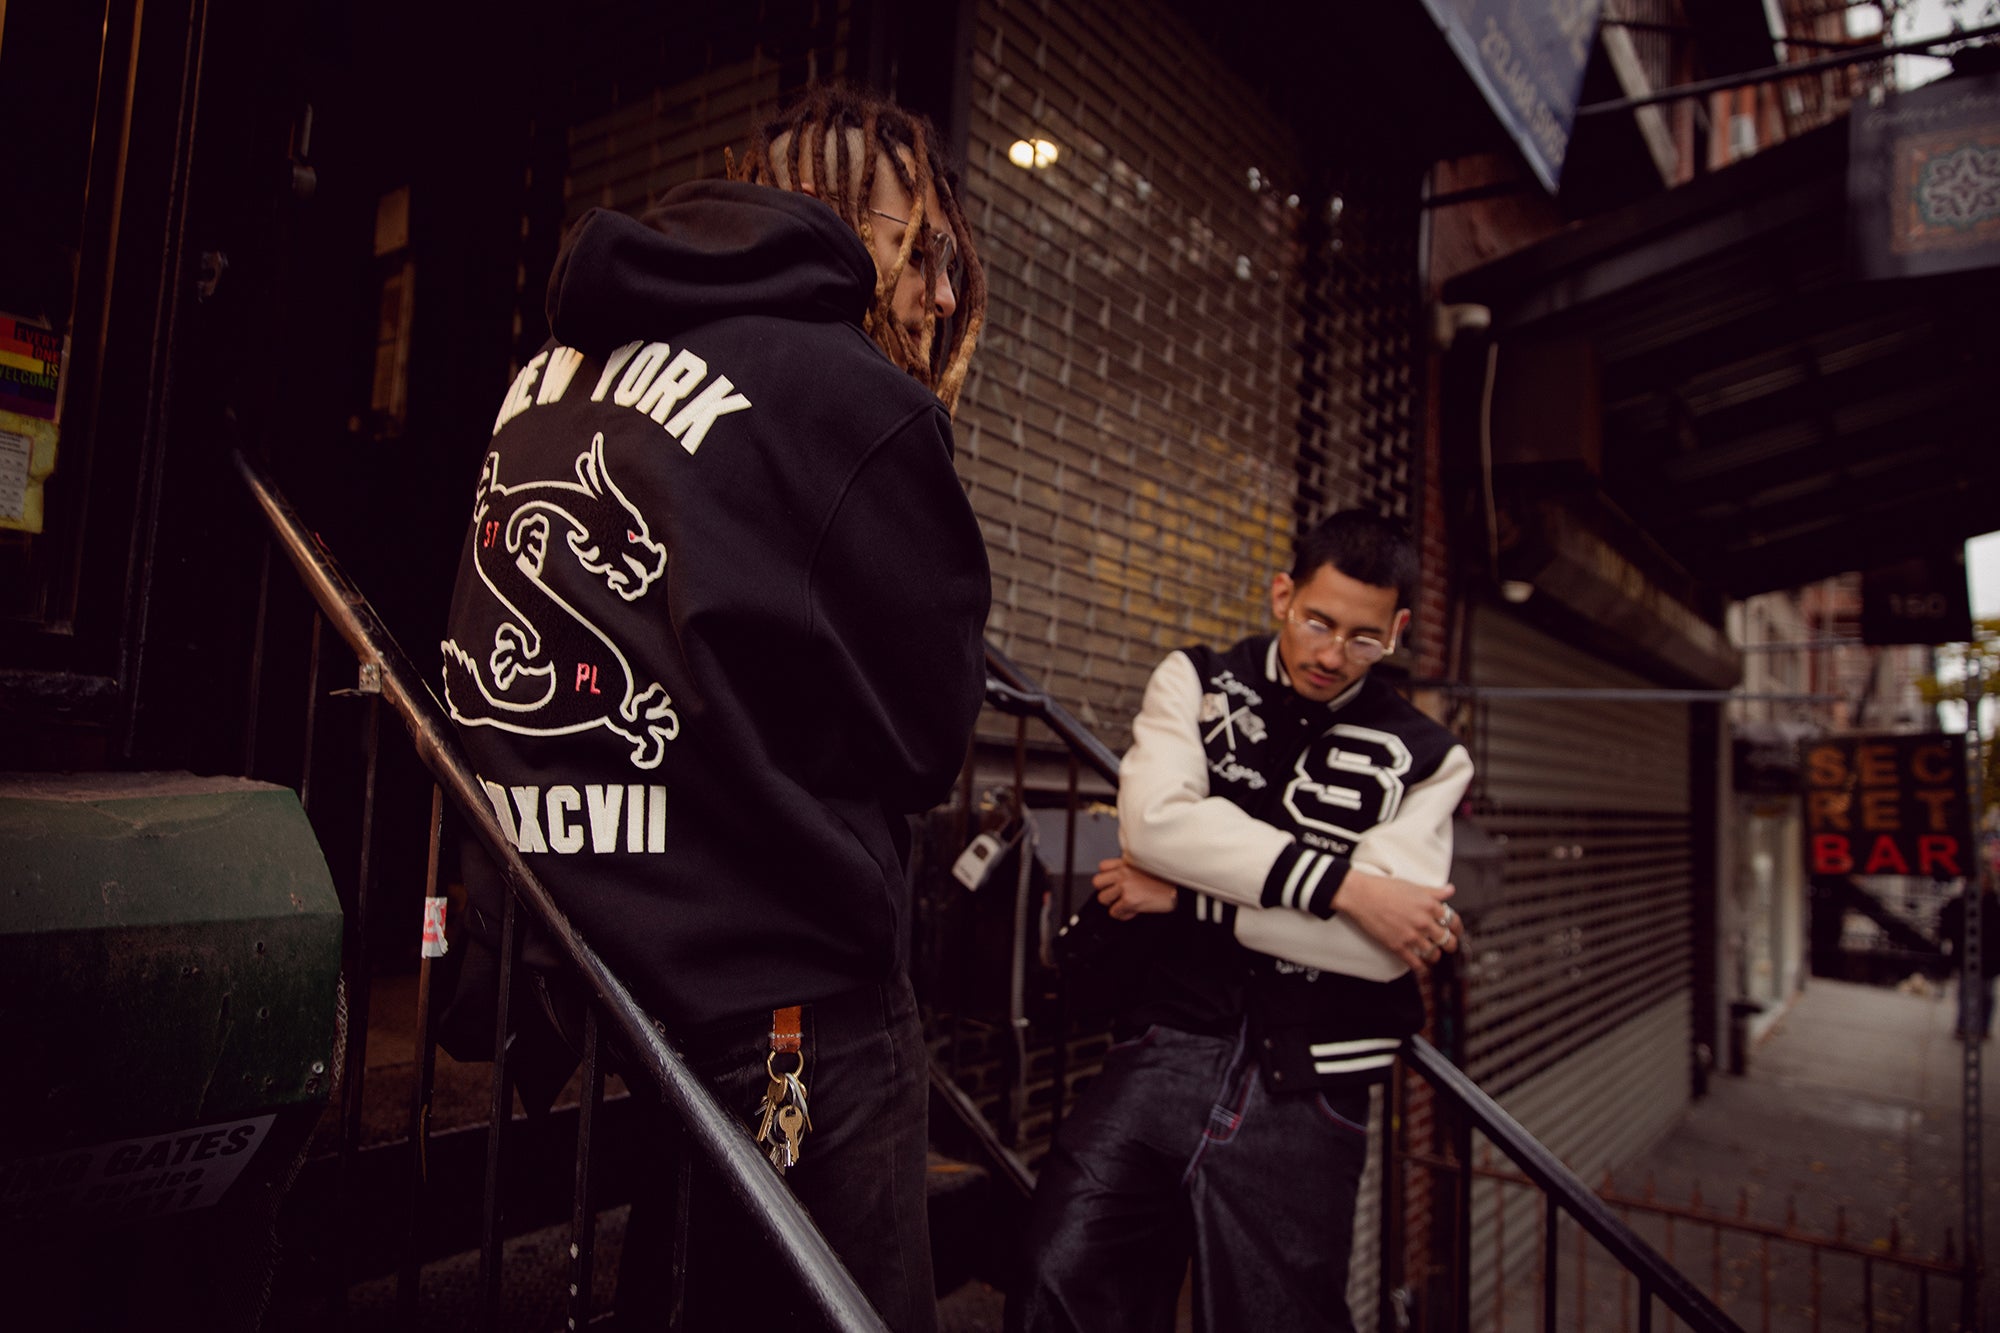 STAPLE - Streetwear Clothing Brand Founded by Jeff Staple